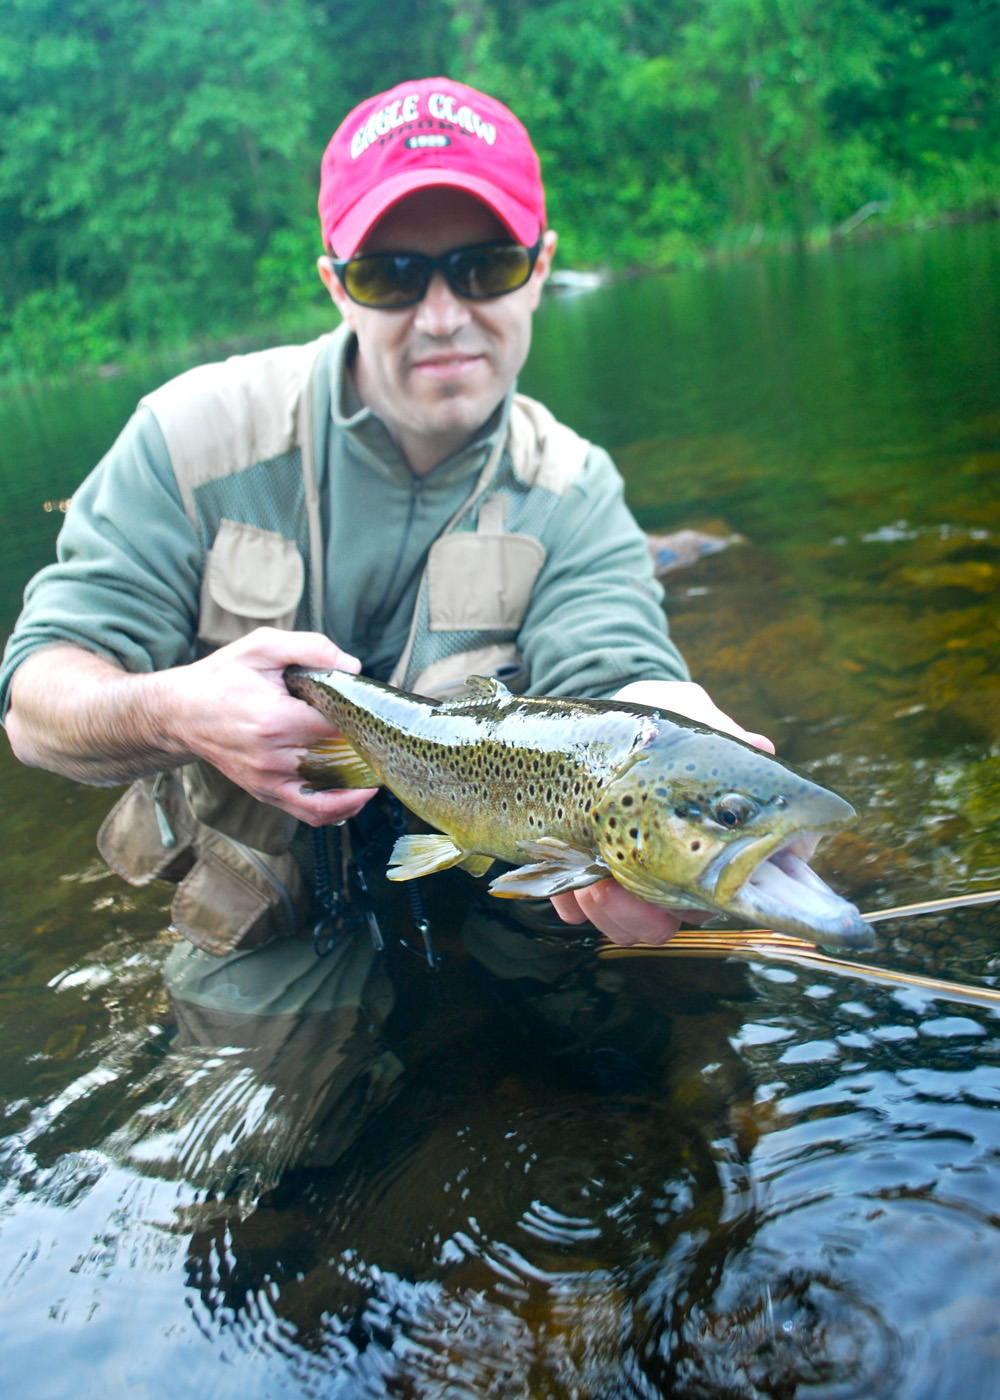 Matt's experience on this river shows, he places the mealworm perfectly, and he's in. The drag is singing as the fish, larger than any we'd caught that morning, takes off in the current. After a spirited battle we snap a photo of the impressive brown trout, definitely a highlight of the trip, before watching it swim away.